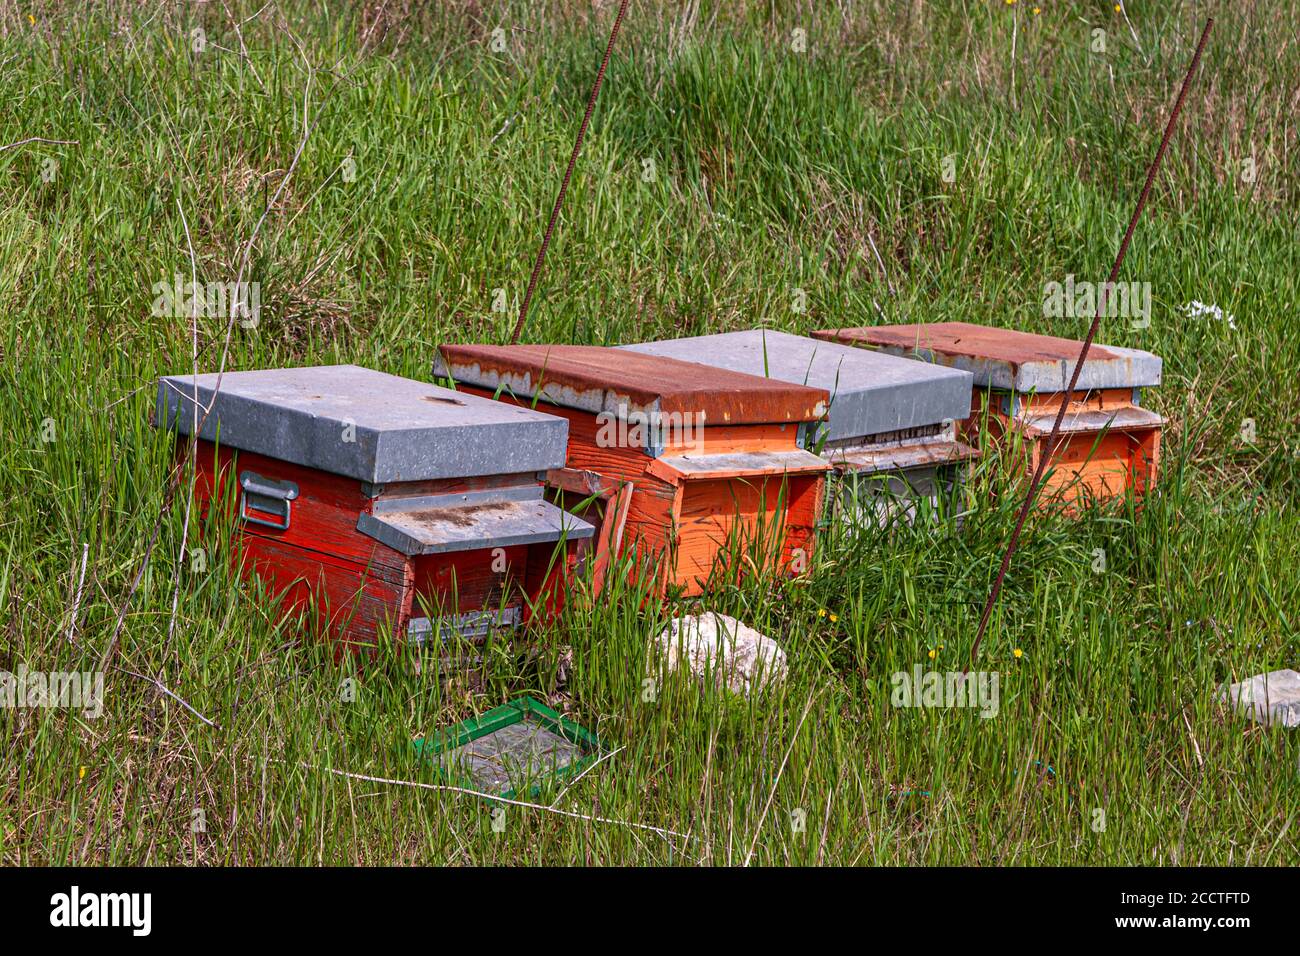 Bee hives stand in tall grass near Bagno Vignoni, Val d'Orcia, Italy Stock Photo